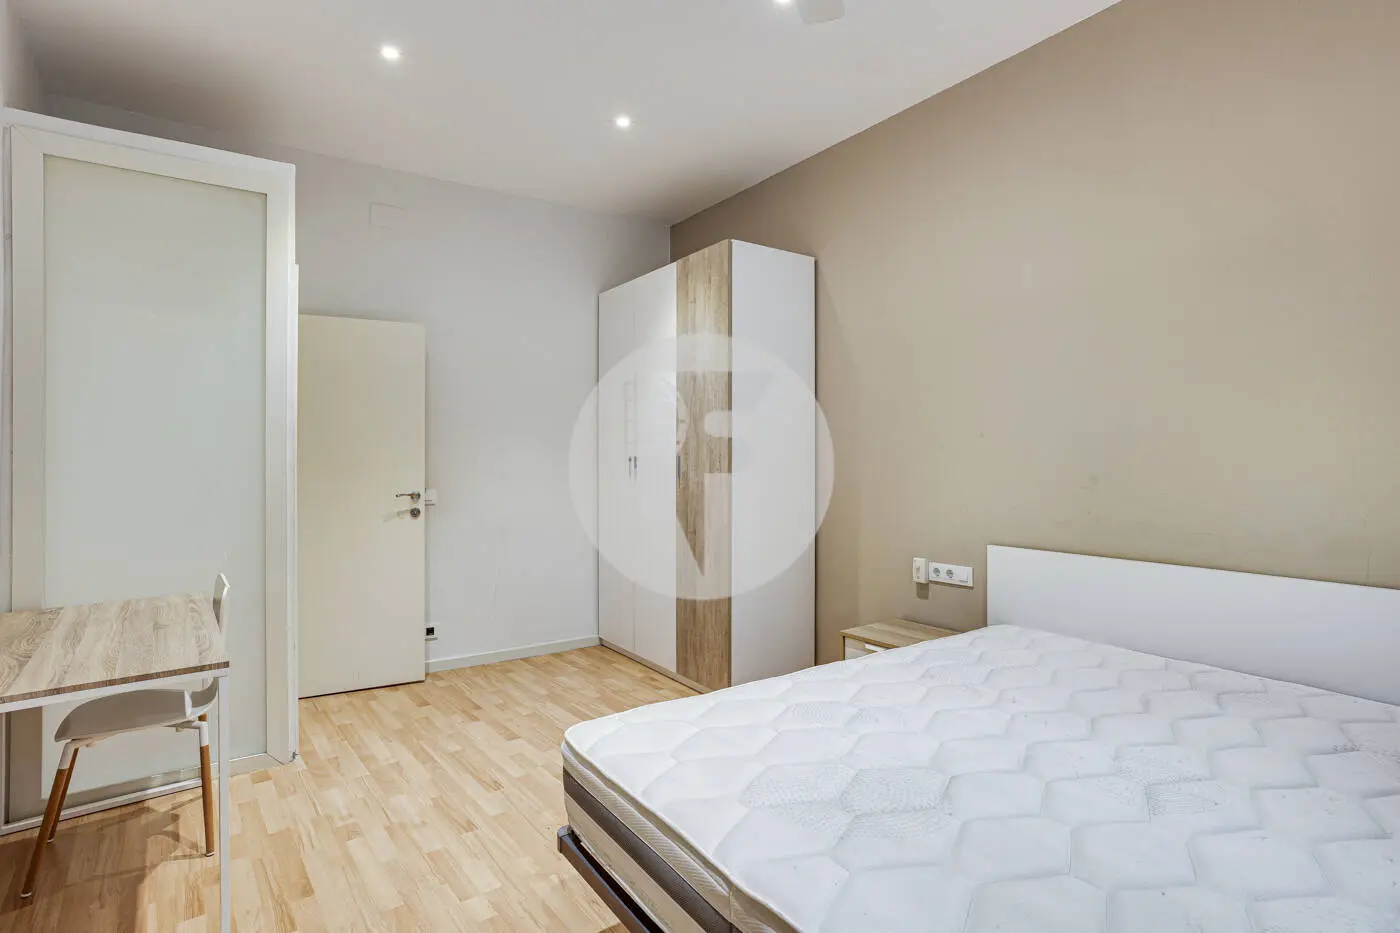 Magnificent apartment for sale next to Pl Universitat of 114m2 according to the land registry, located on Tallers Street in the Ciutat Vella neighborhood of Barcelona 25